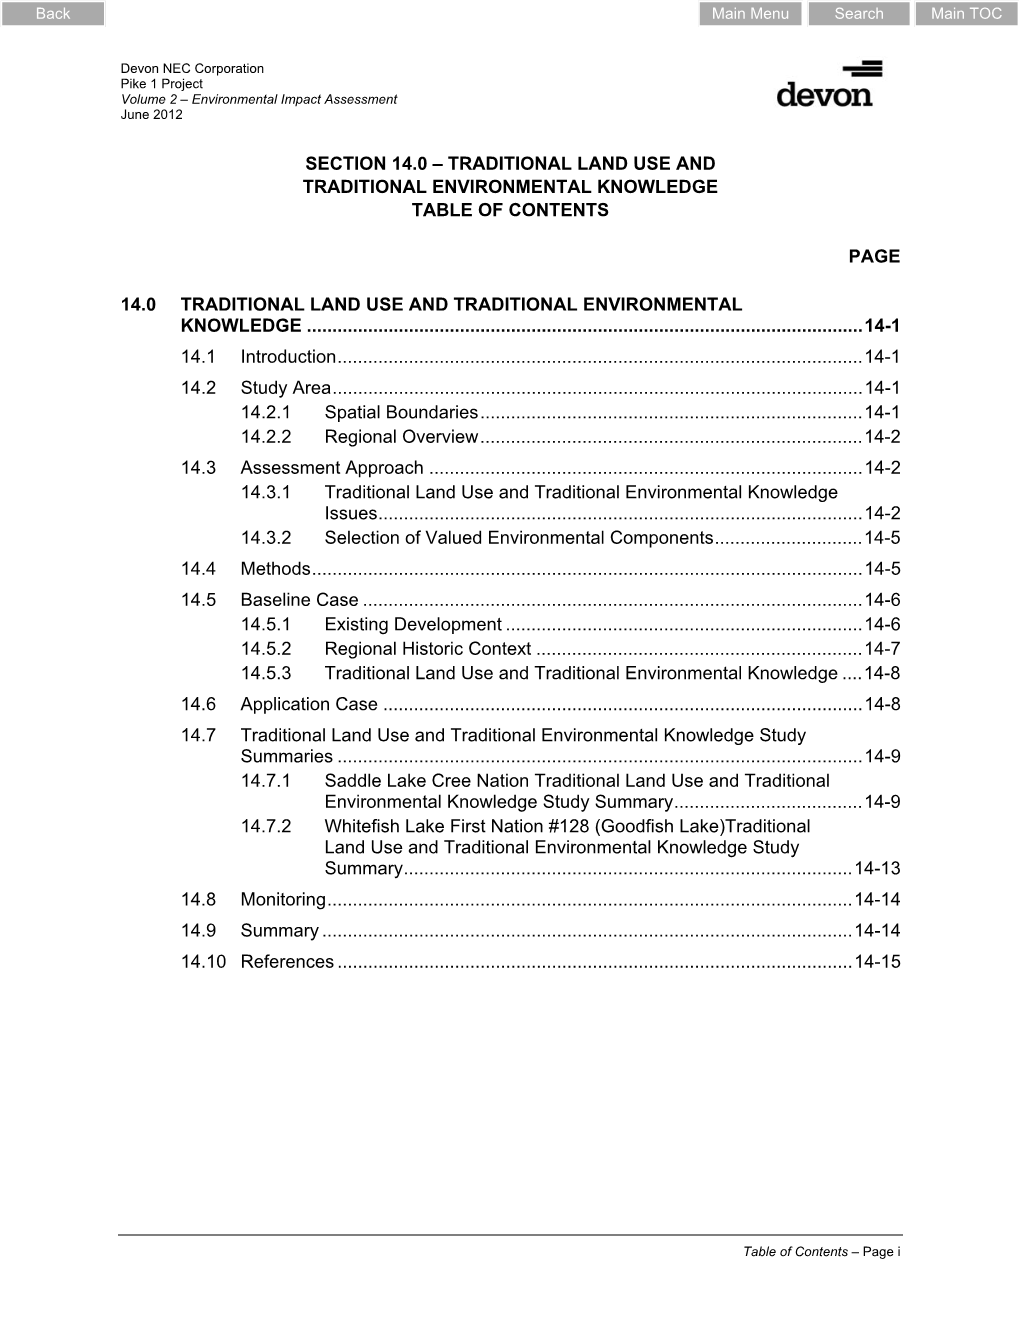 Traditional Land Use and Traditional Environmental Knowledge Table of Contents